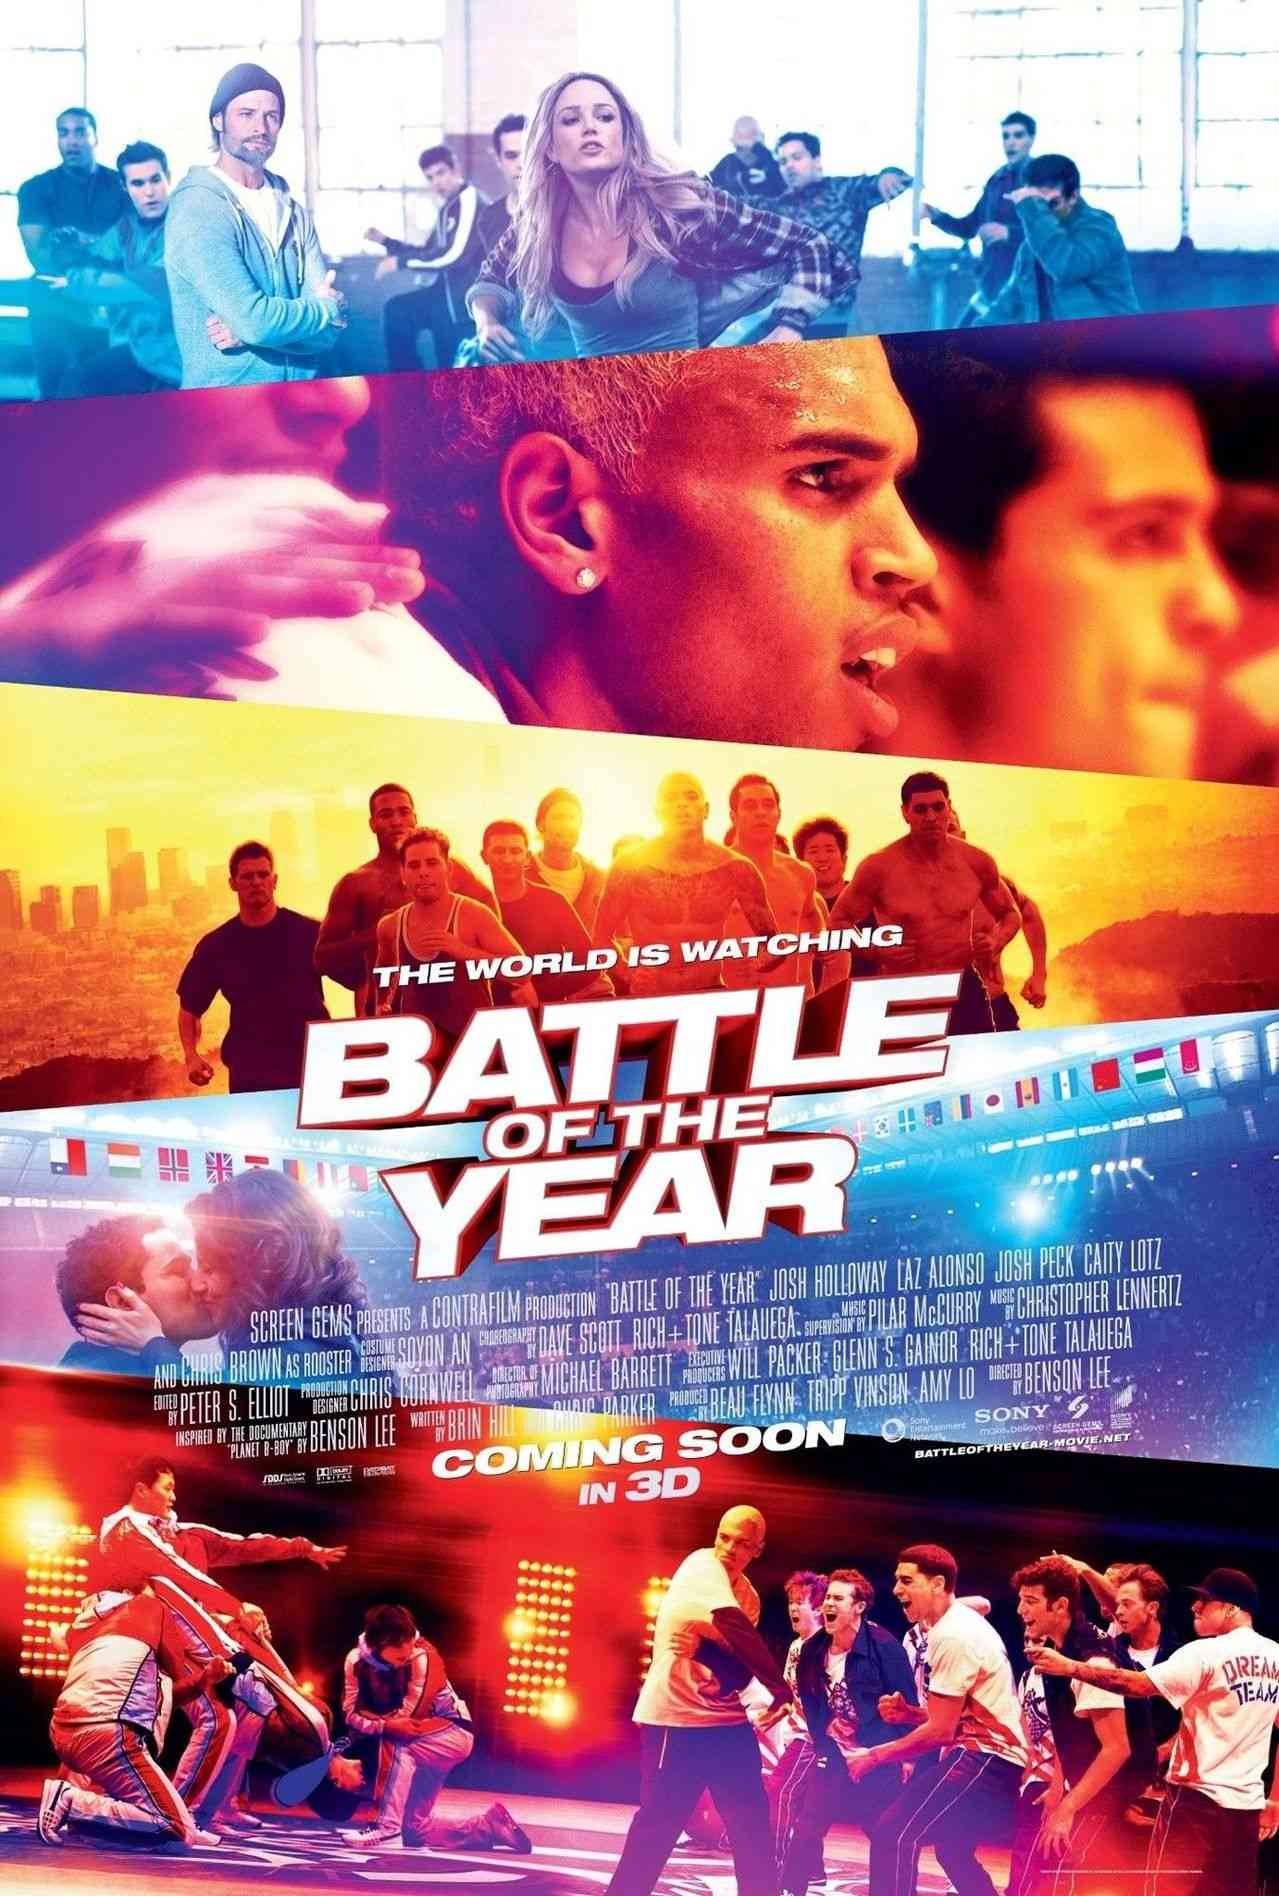 FULL MOVIE: Battle Of The Year (2013) [Music]